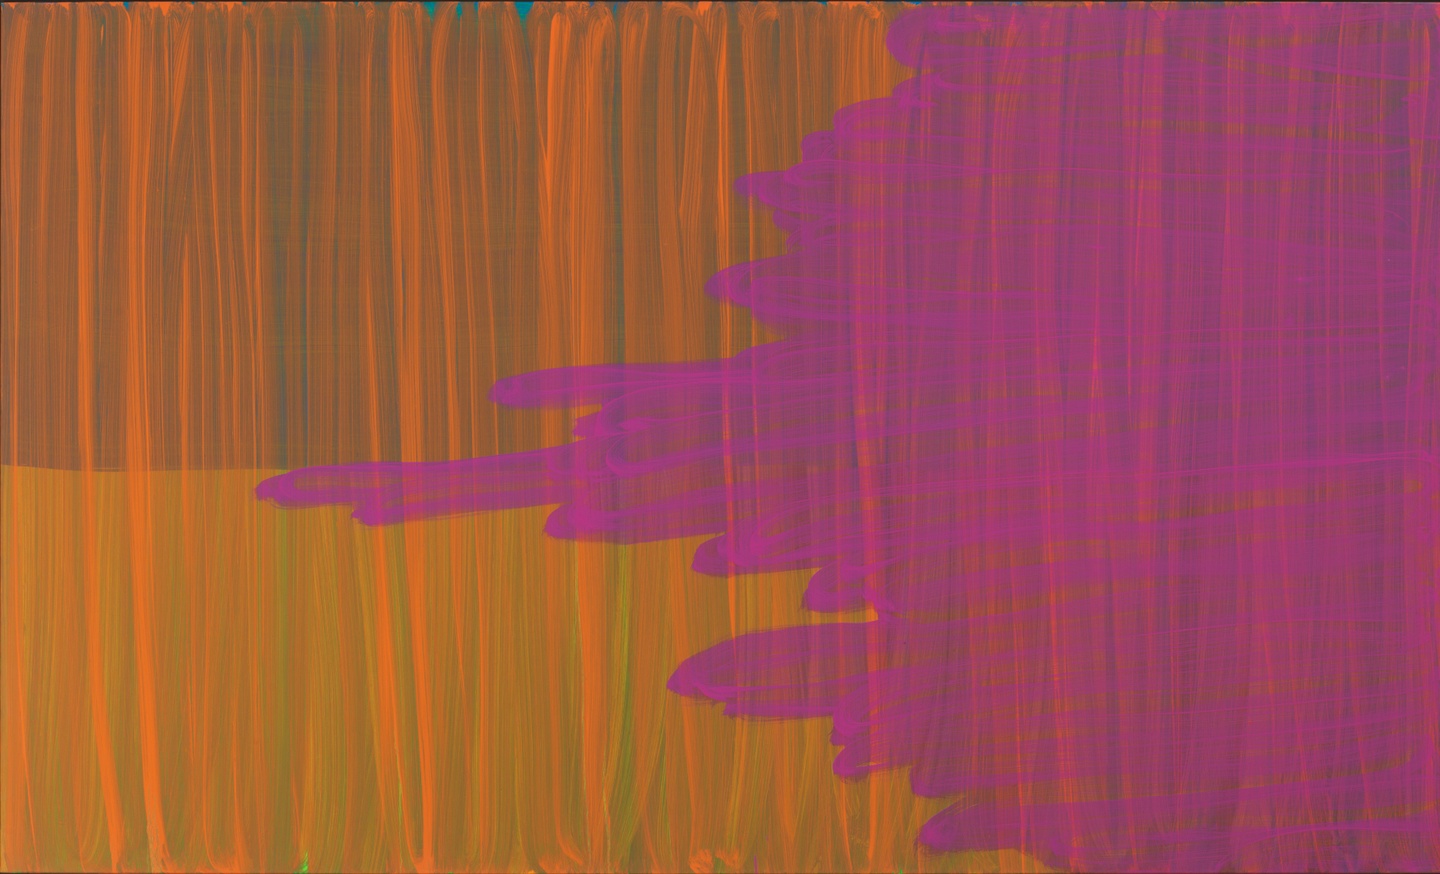 An abstract painting consisting of orange vertical stripes overlayed with an encroaching fuscia field